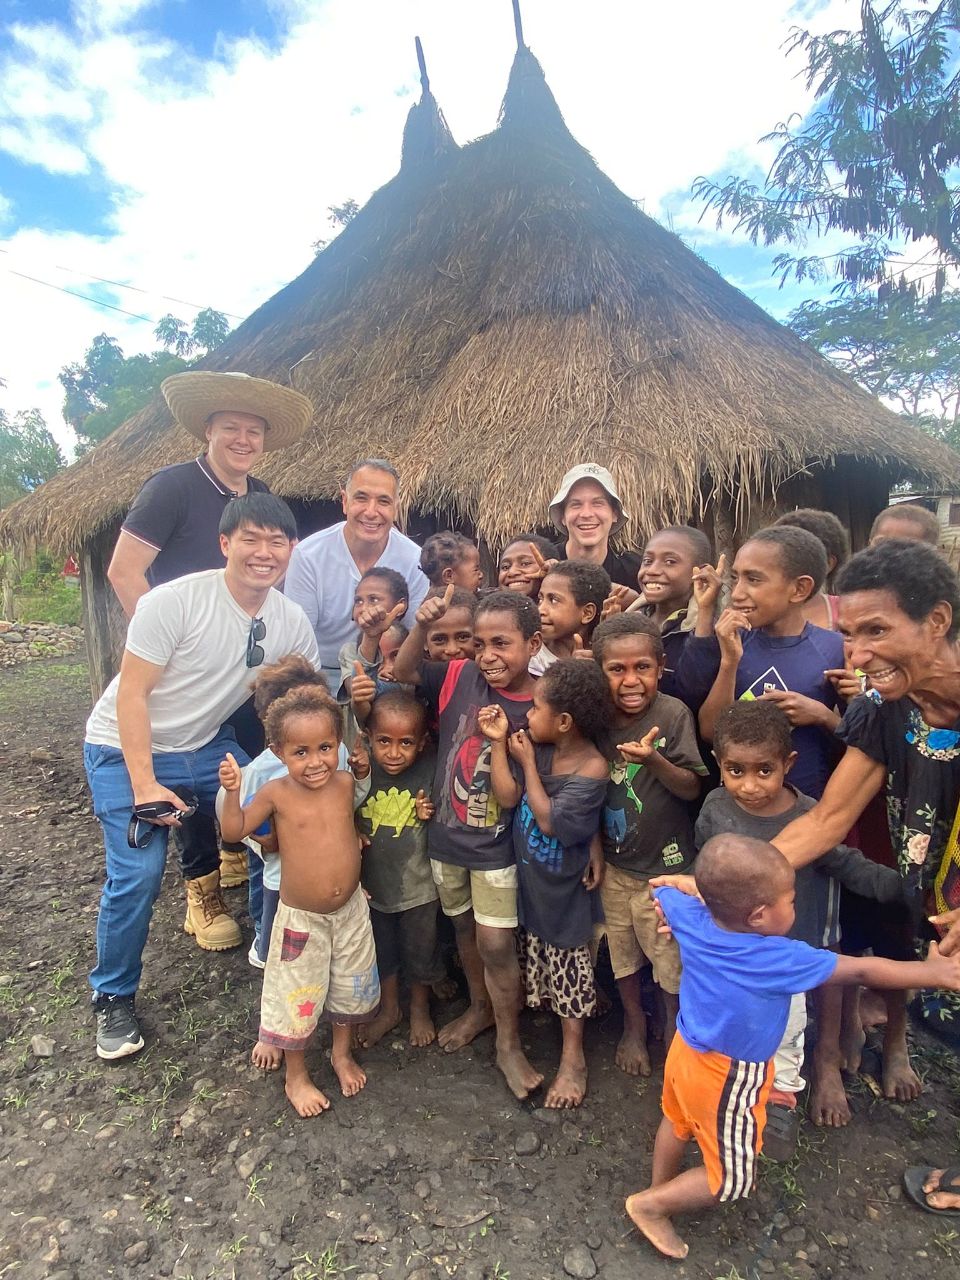 George taking a picture with smiling kids from a local village in the coffee growing region of PNG